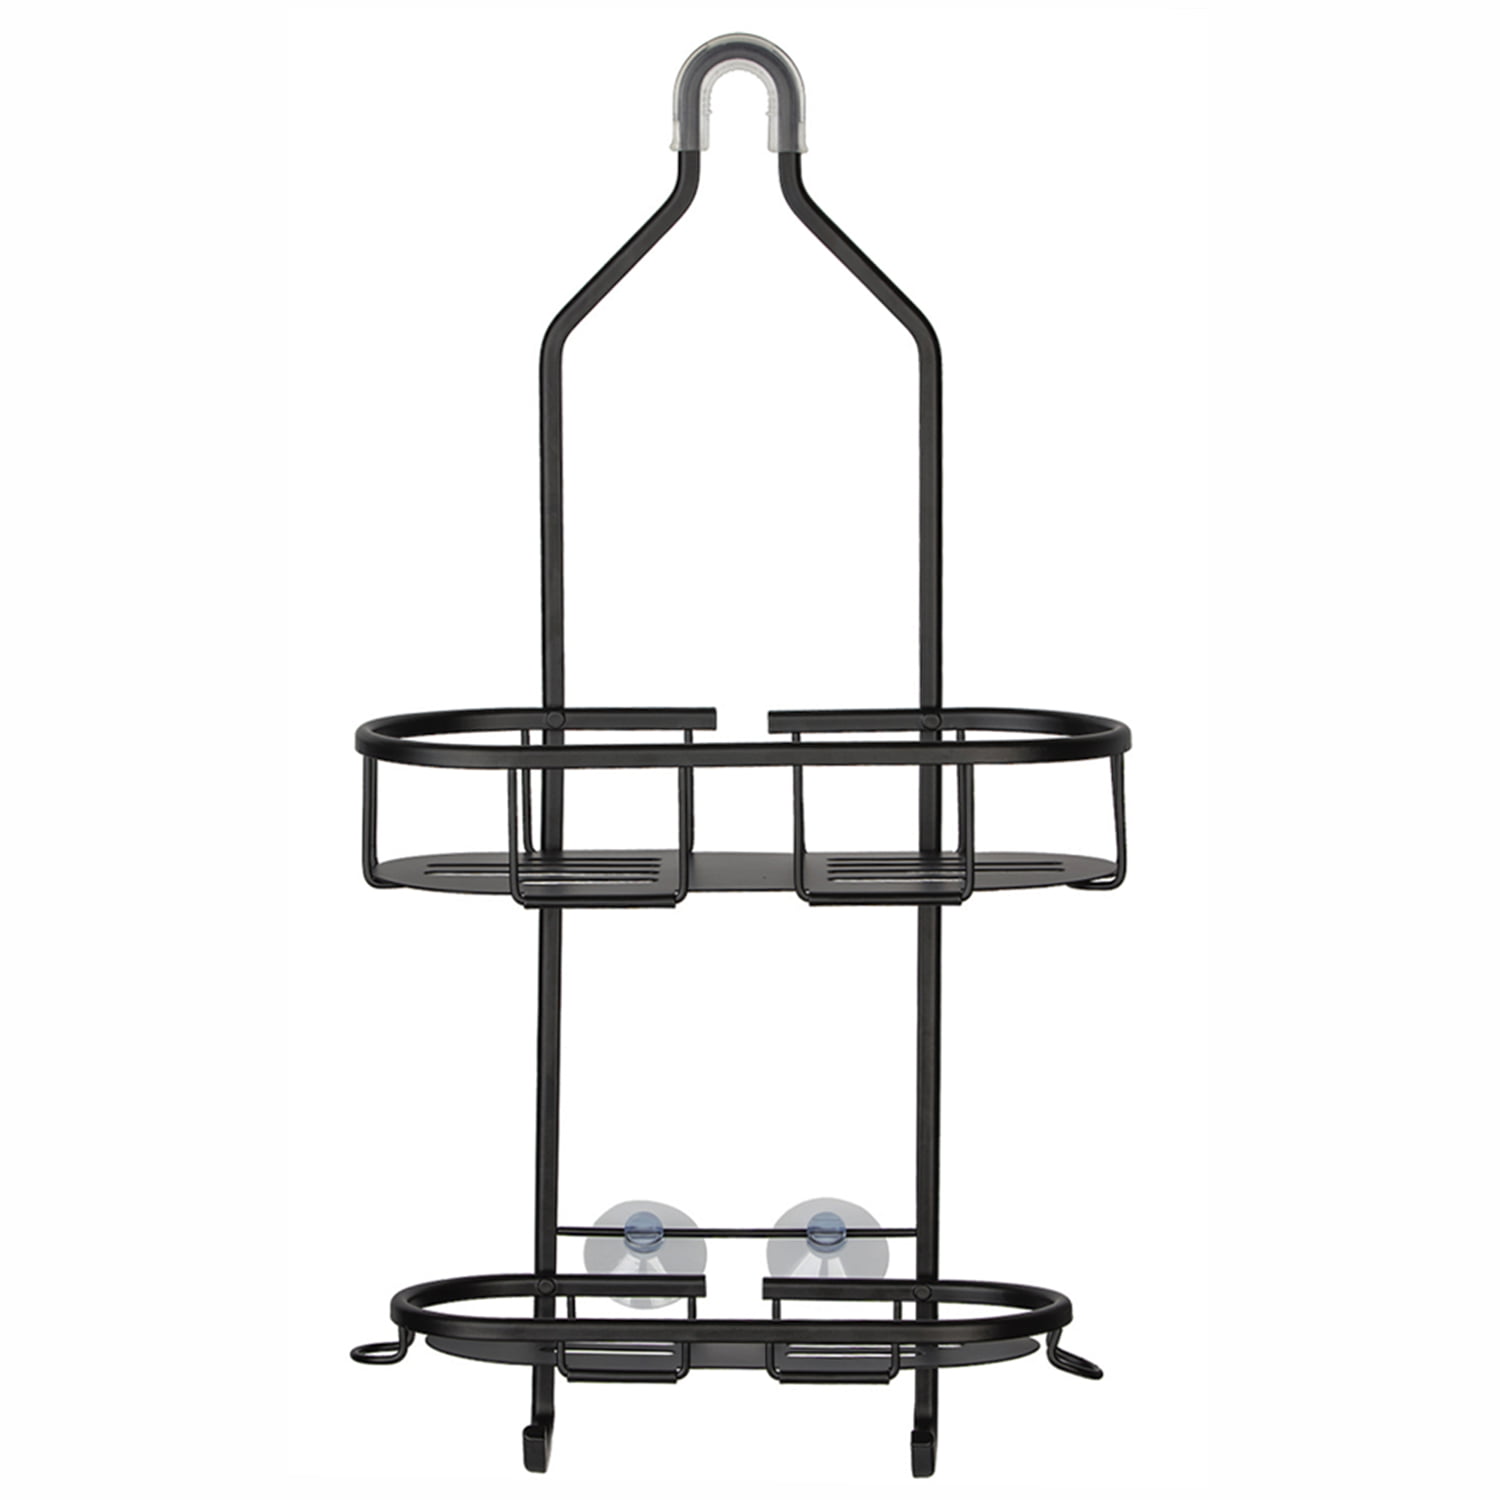 Epicano Shower Caddy Hanging, Anti-Swing Over Head Shower Caddy Rustproof with Hooks for Towels, Sponge and More, Matte Black